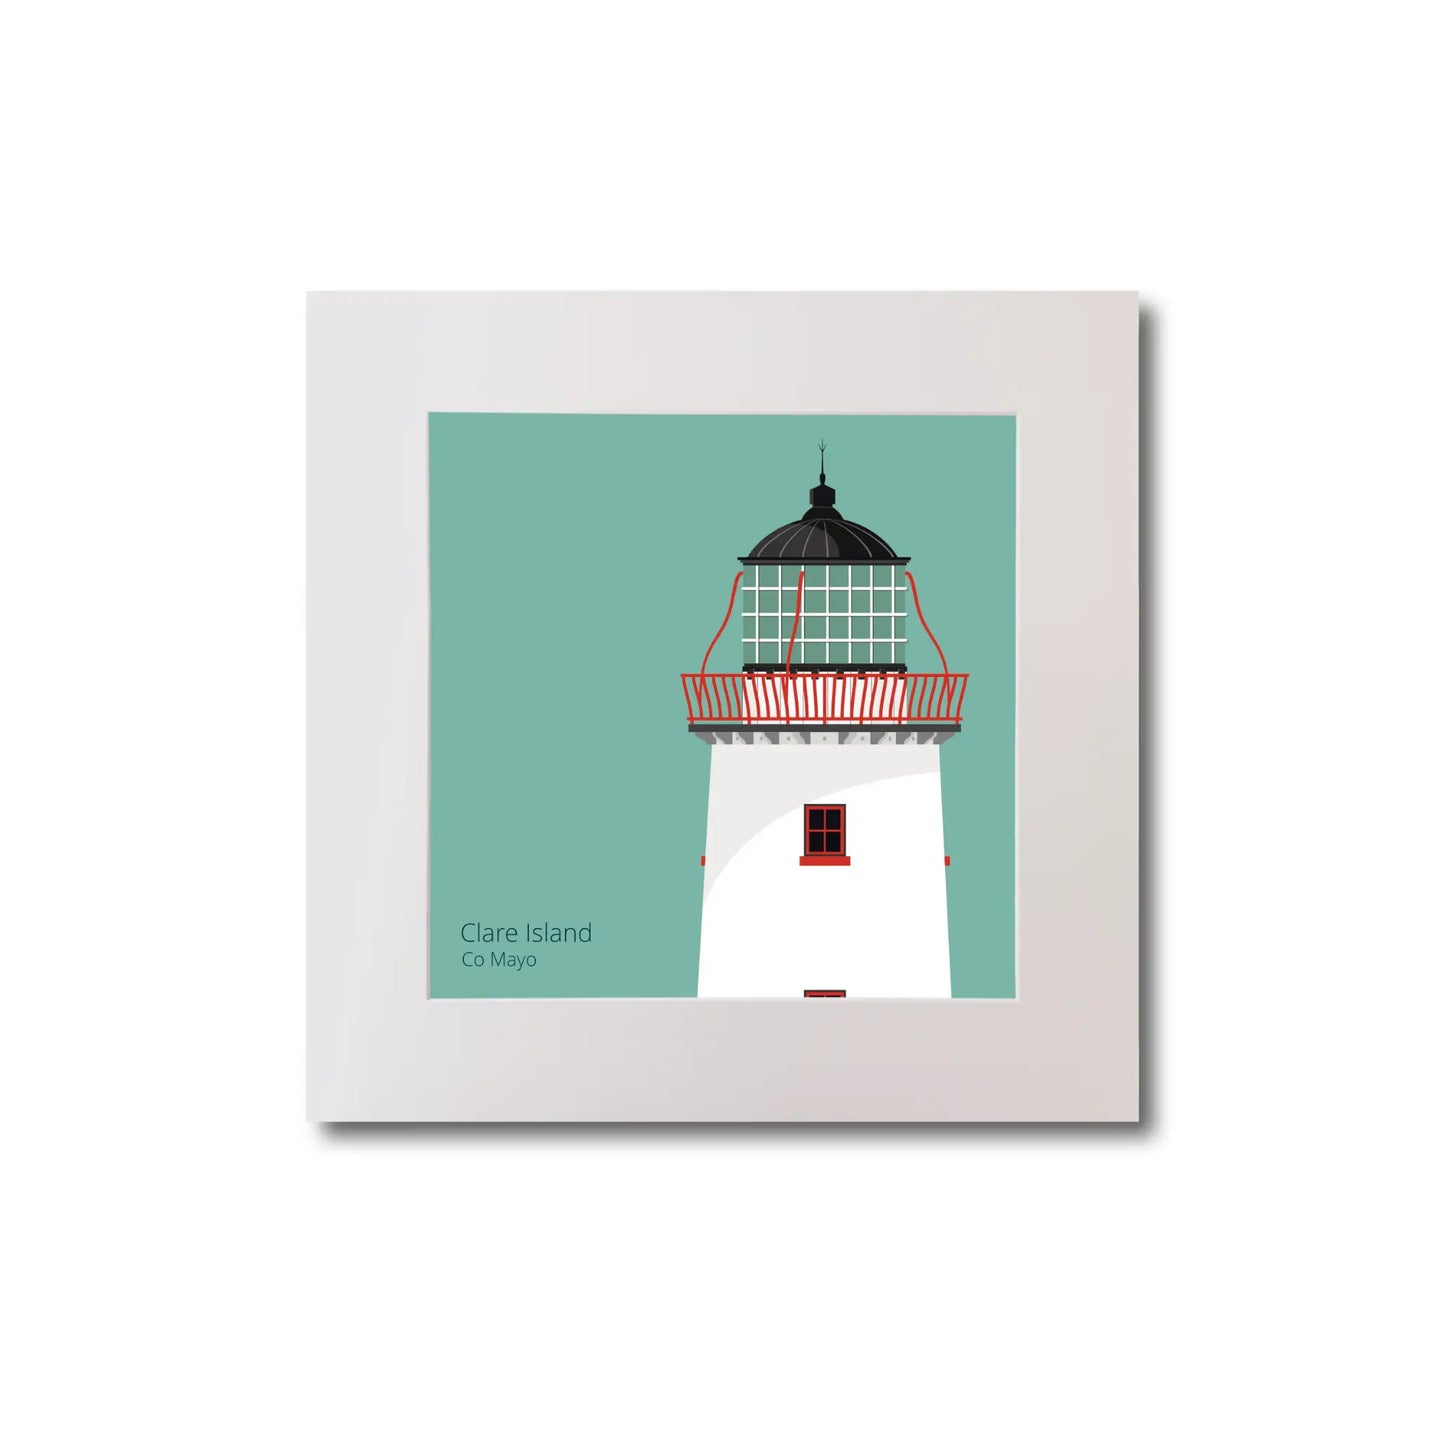 Illustration of Clare Island lighthouse on an ocean green background, mounted and measuring 20x20cm.